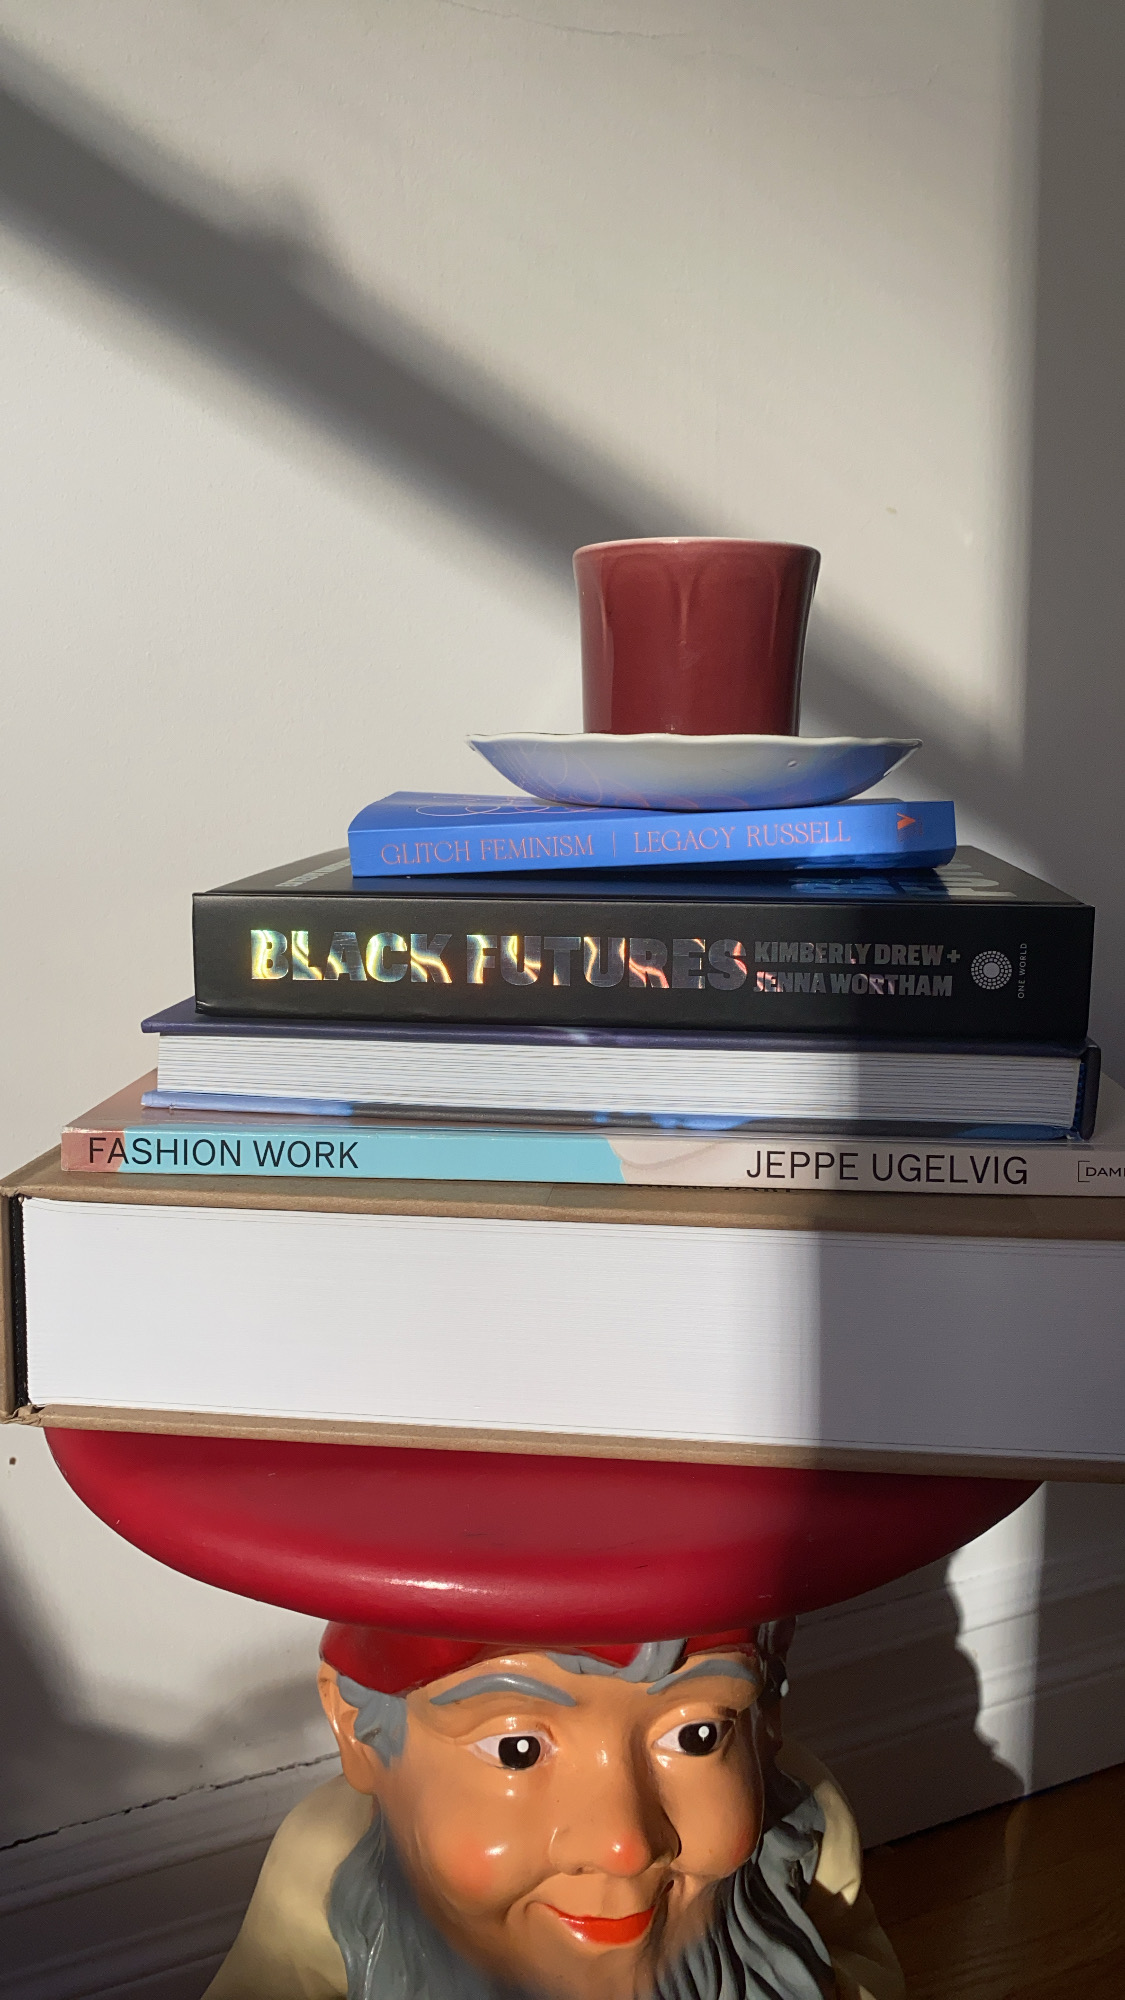 The top art books of 2021 on our nightstand.